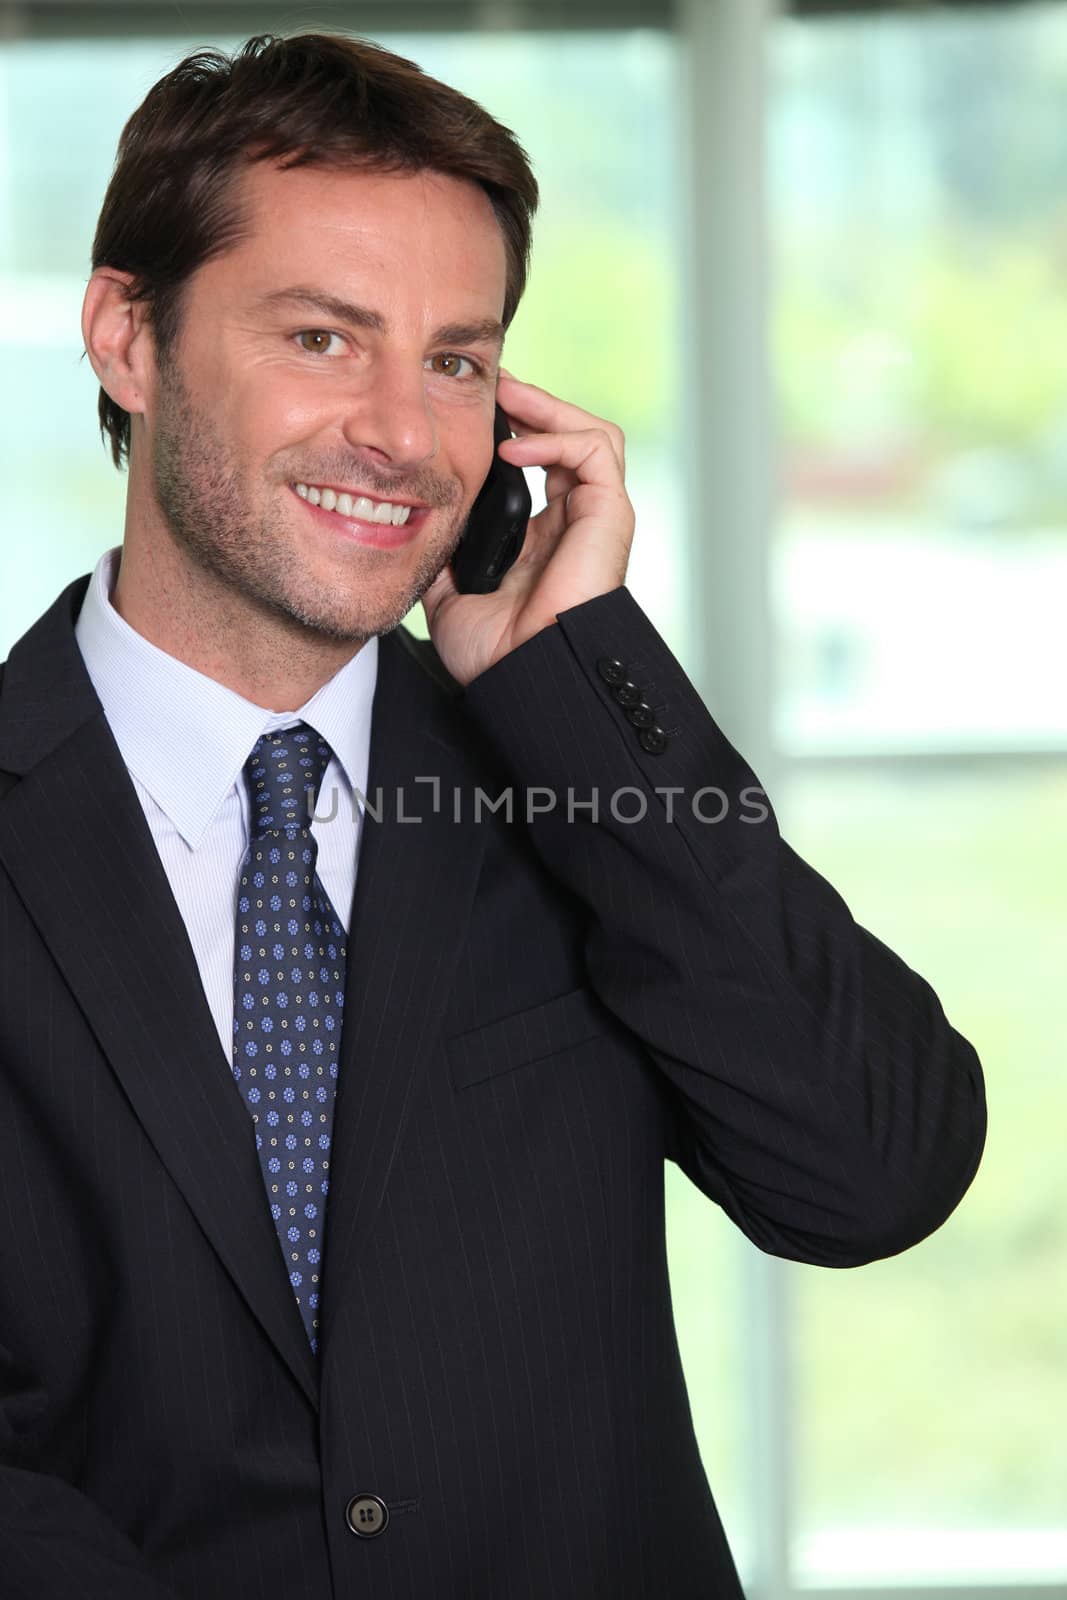 Smiling businessman using a telephone by phovoir